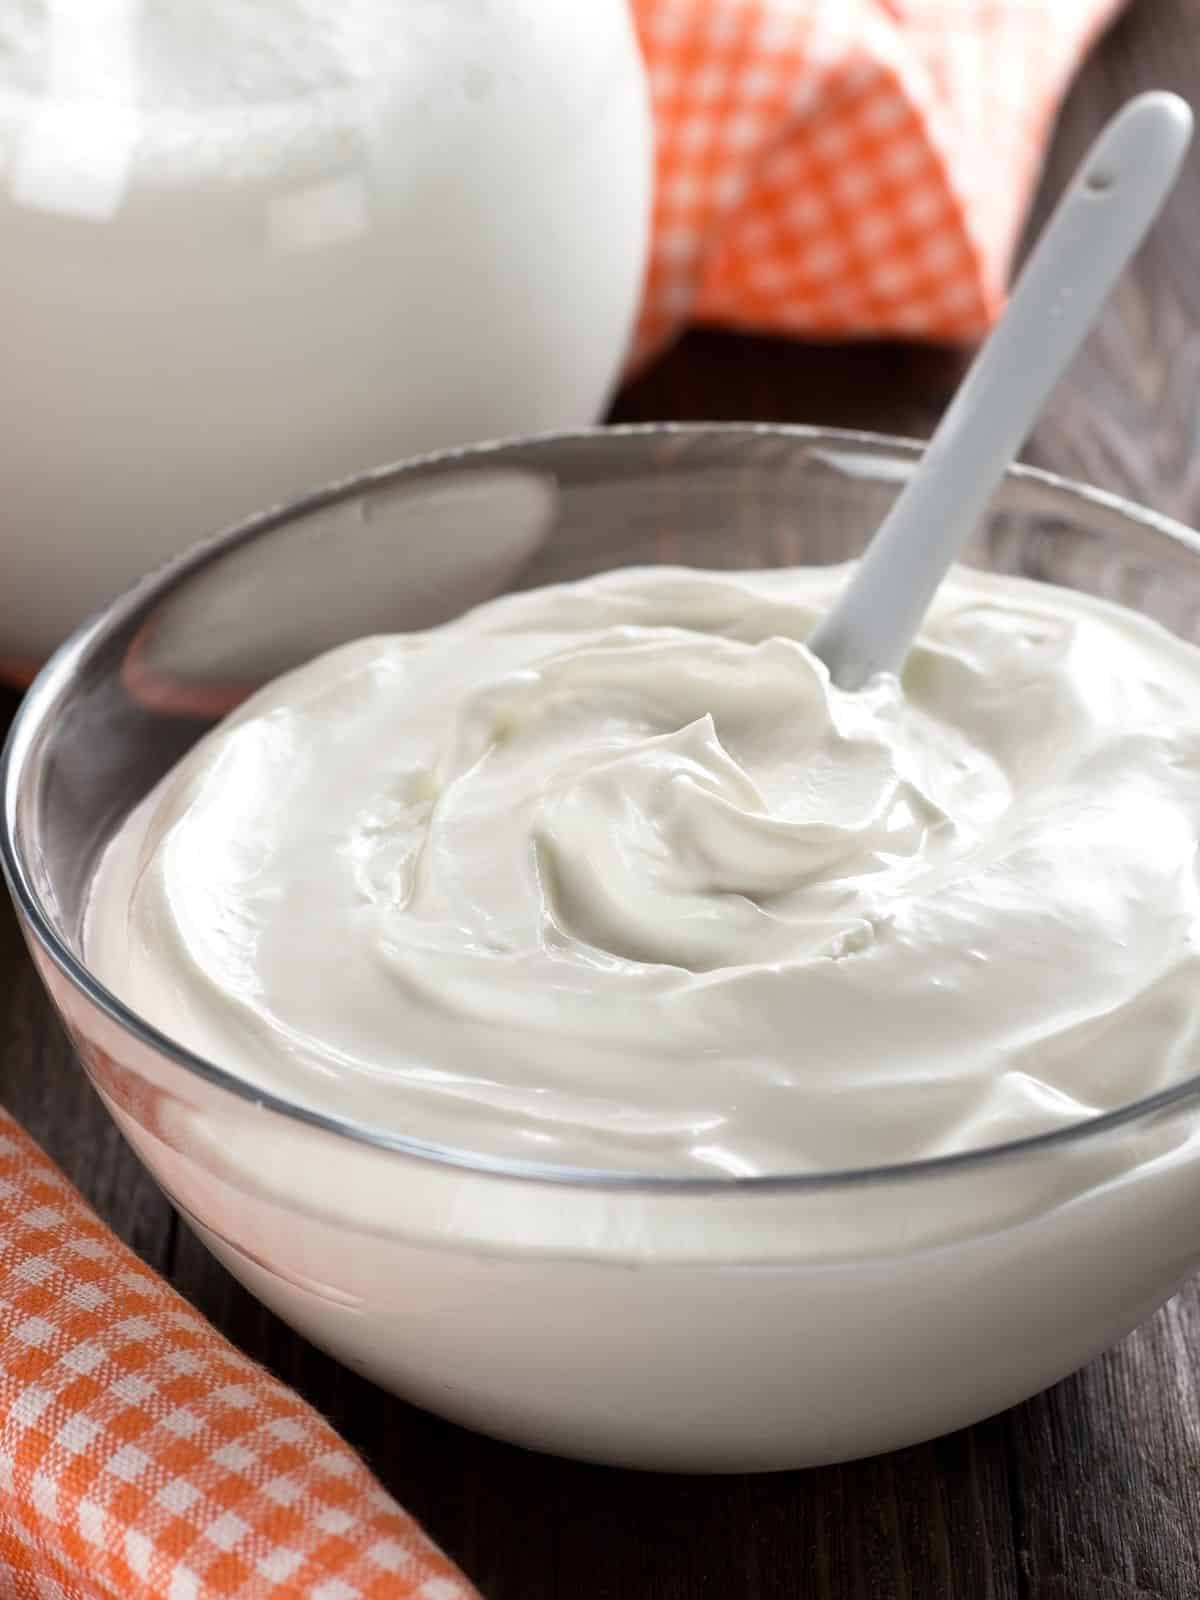 A glass bowl full of sour cream.